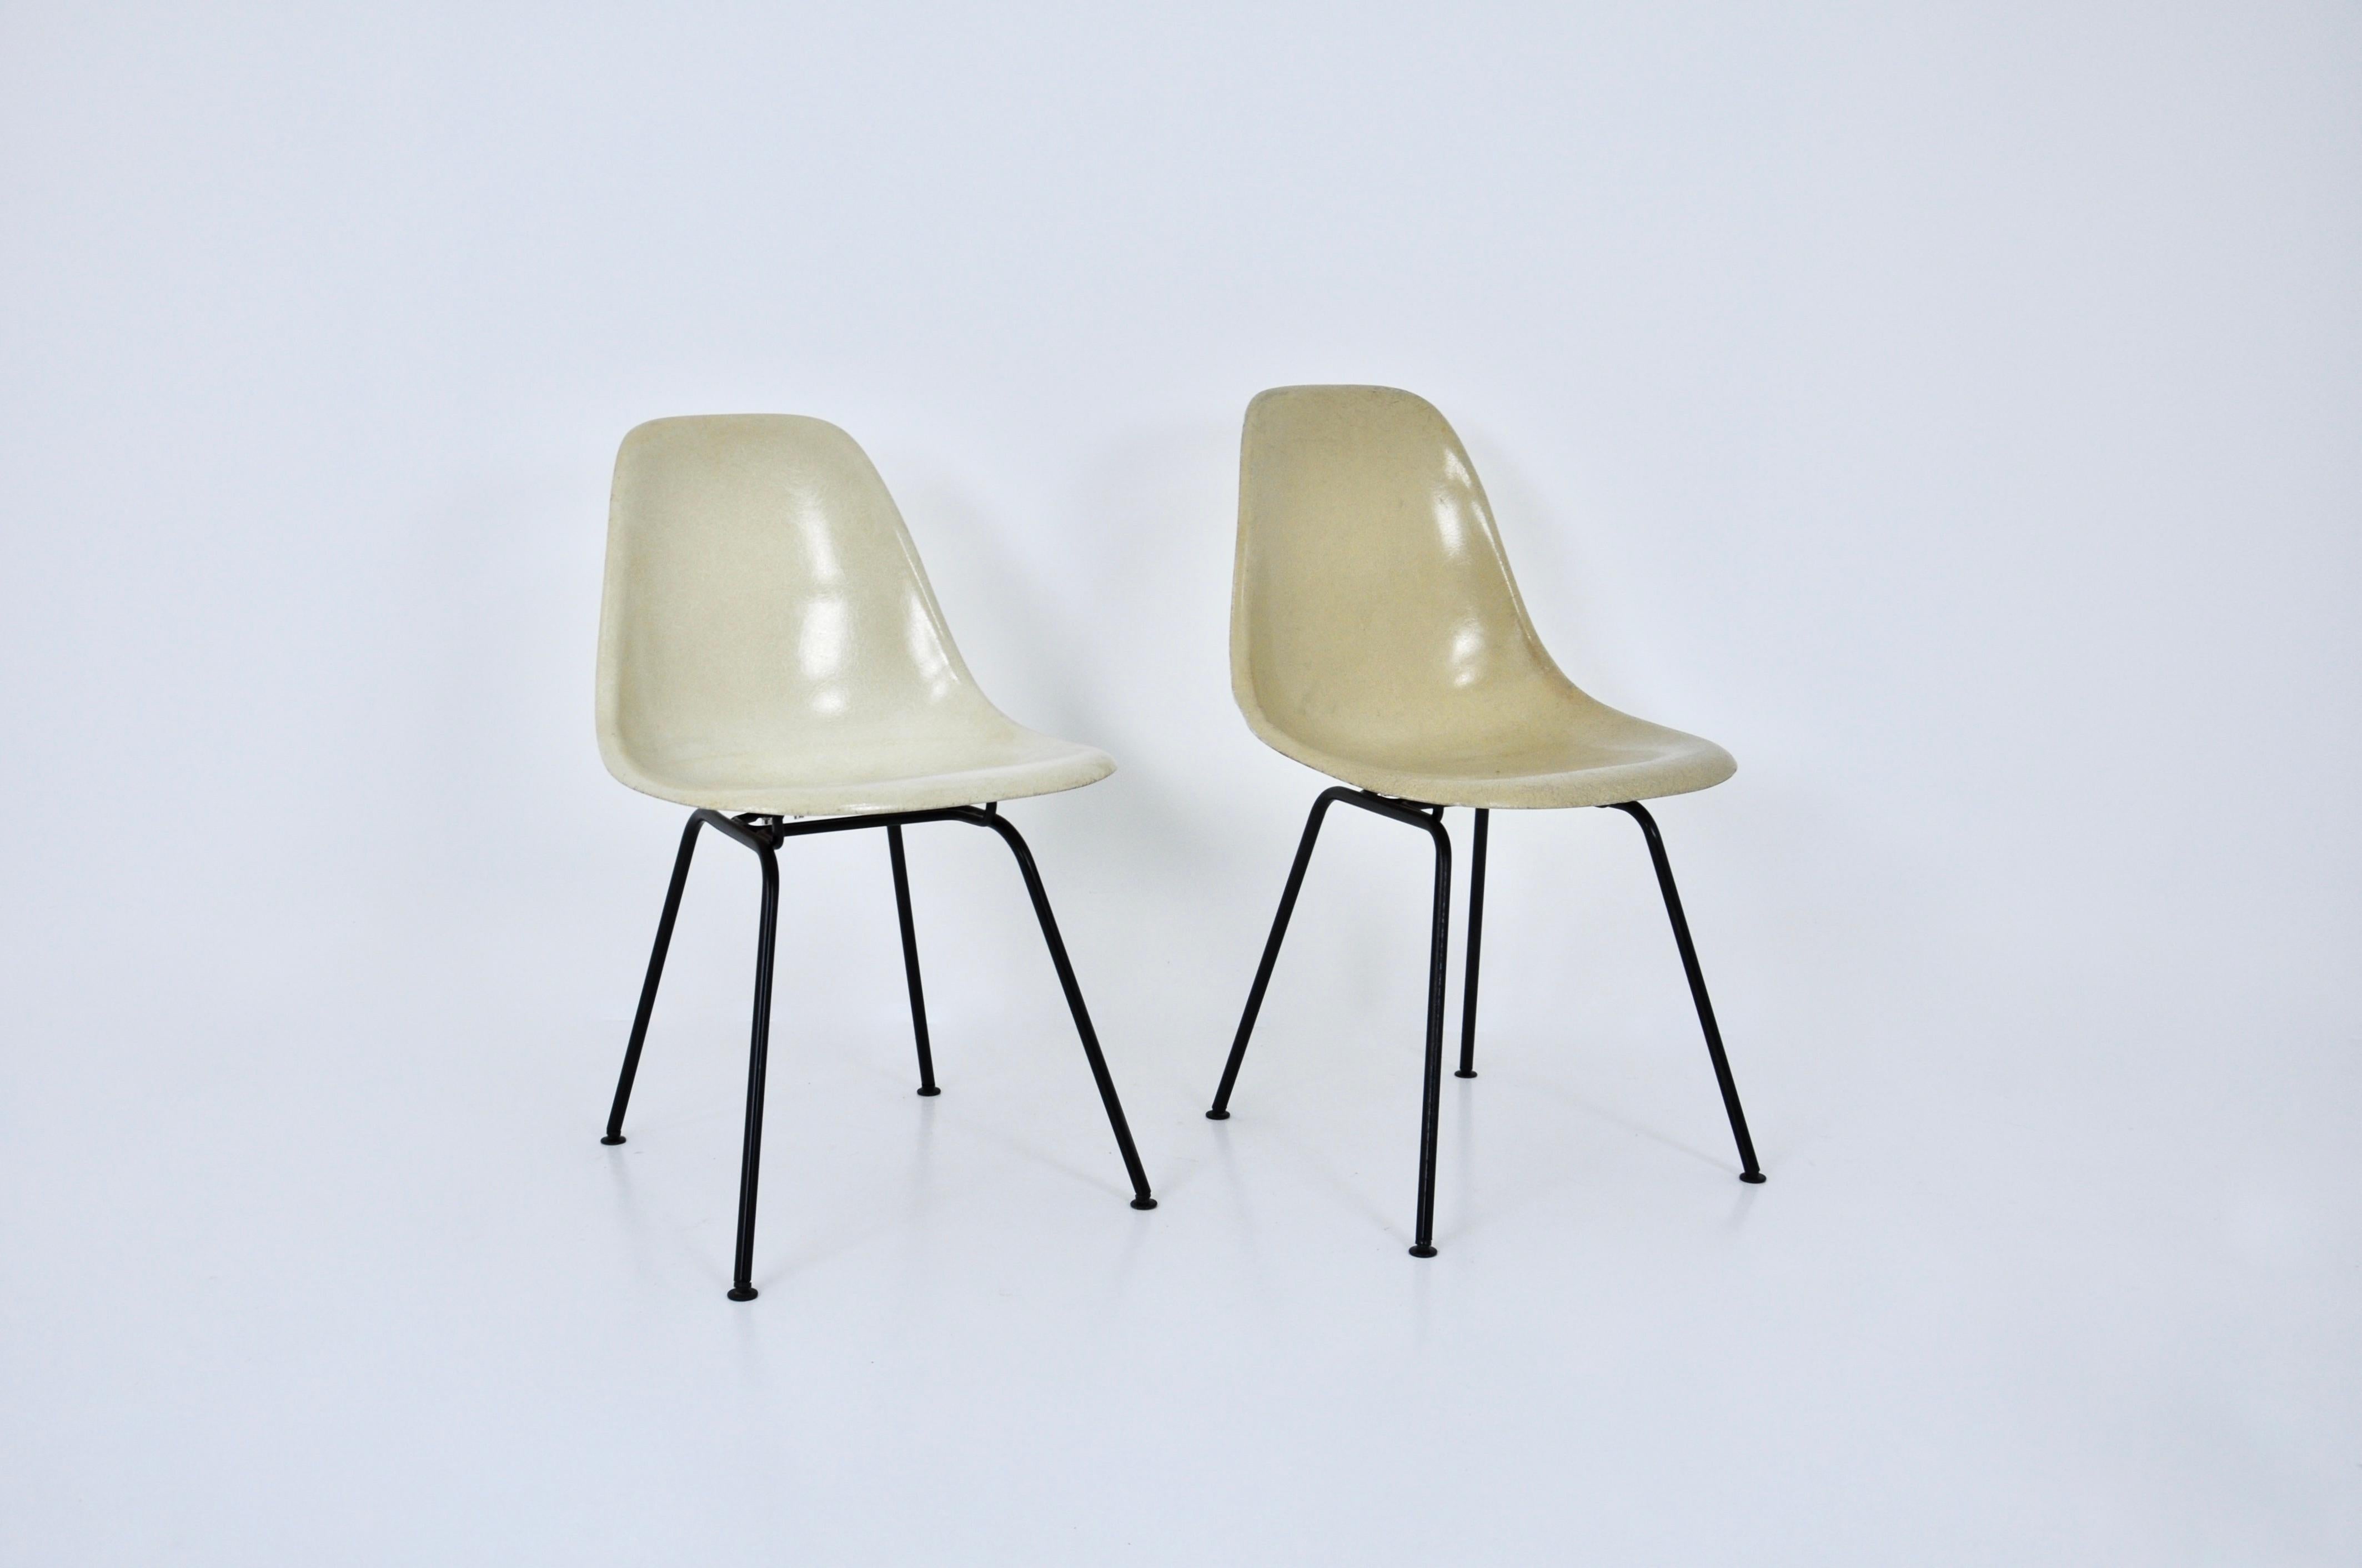 Set of cream colored fibreglass chairs with black metal leg. Stamped Herman Miller (see photo). Seat height: 46 cm. Wear due to time and age of the chairs.
 